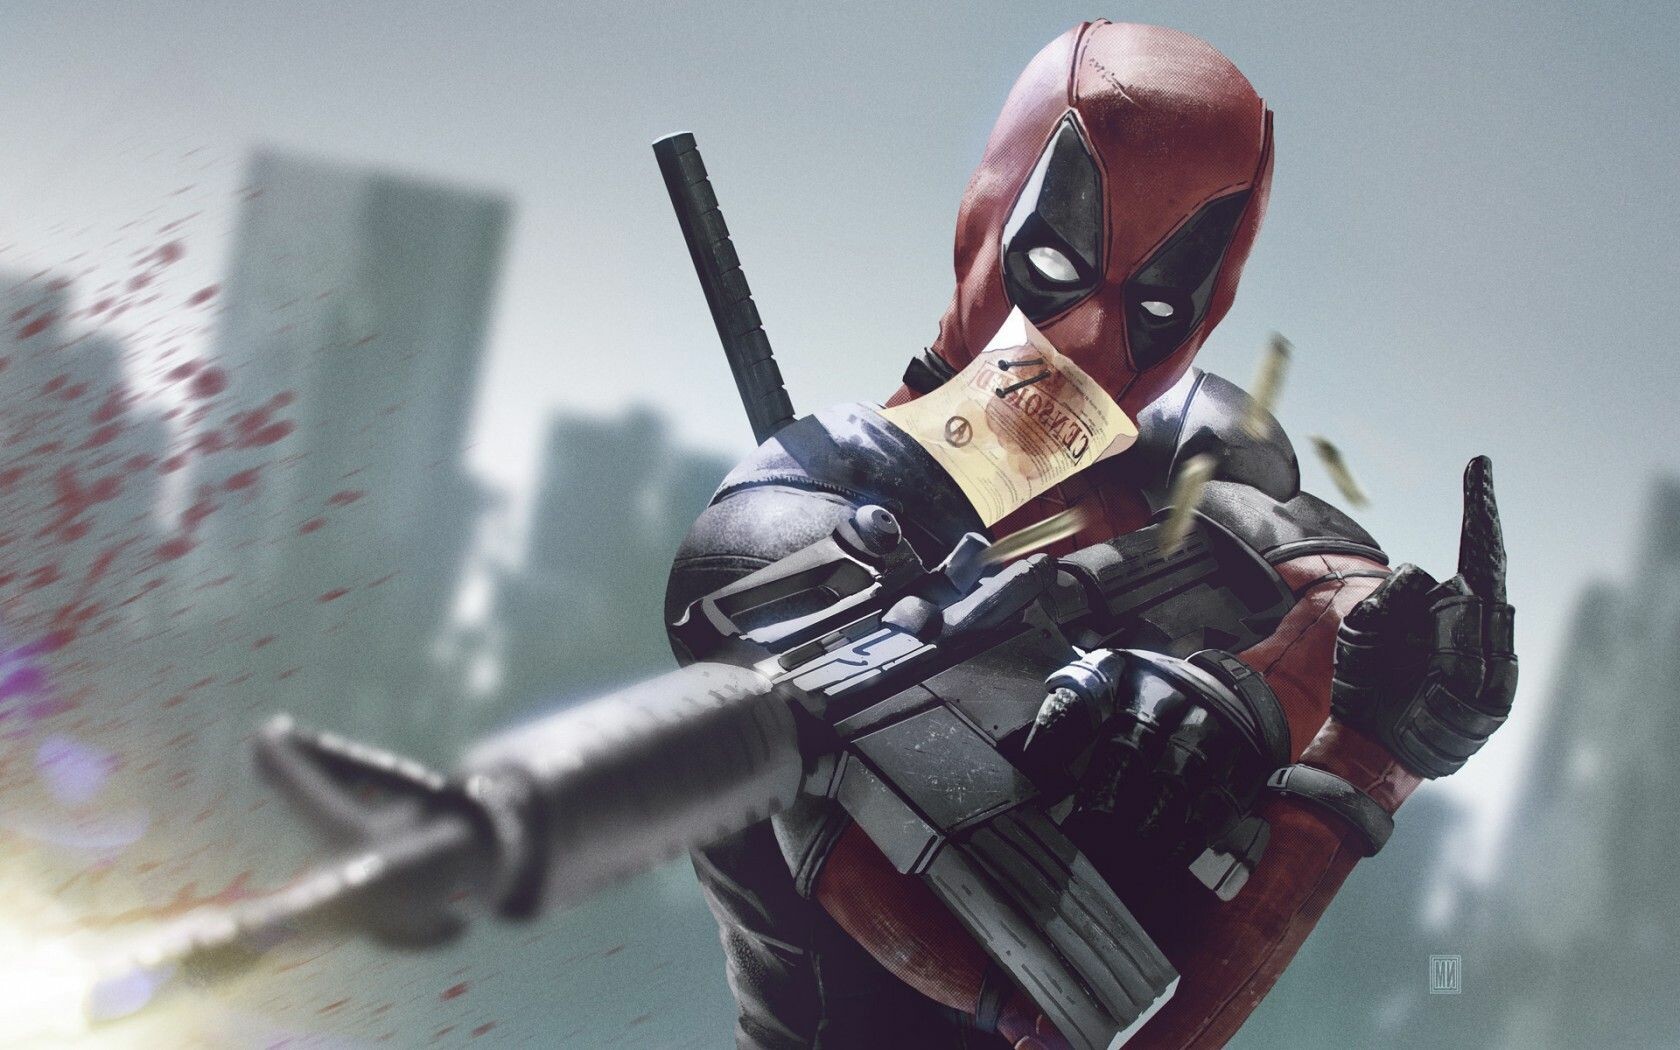 37+ Deadpool Movie Wallpapers: HD, 4K, 5K for PC and Mobile | Download free  images for iPhone, Android